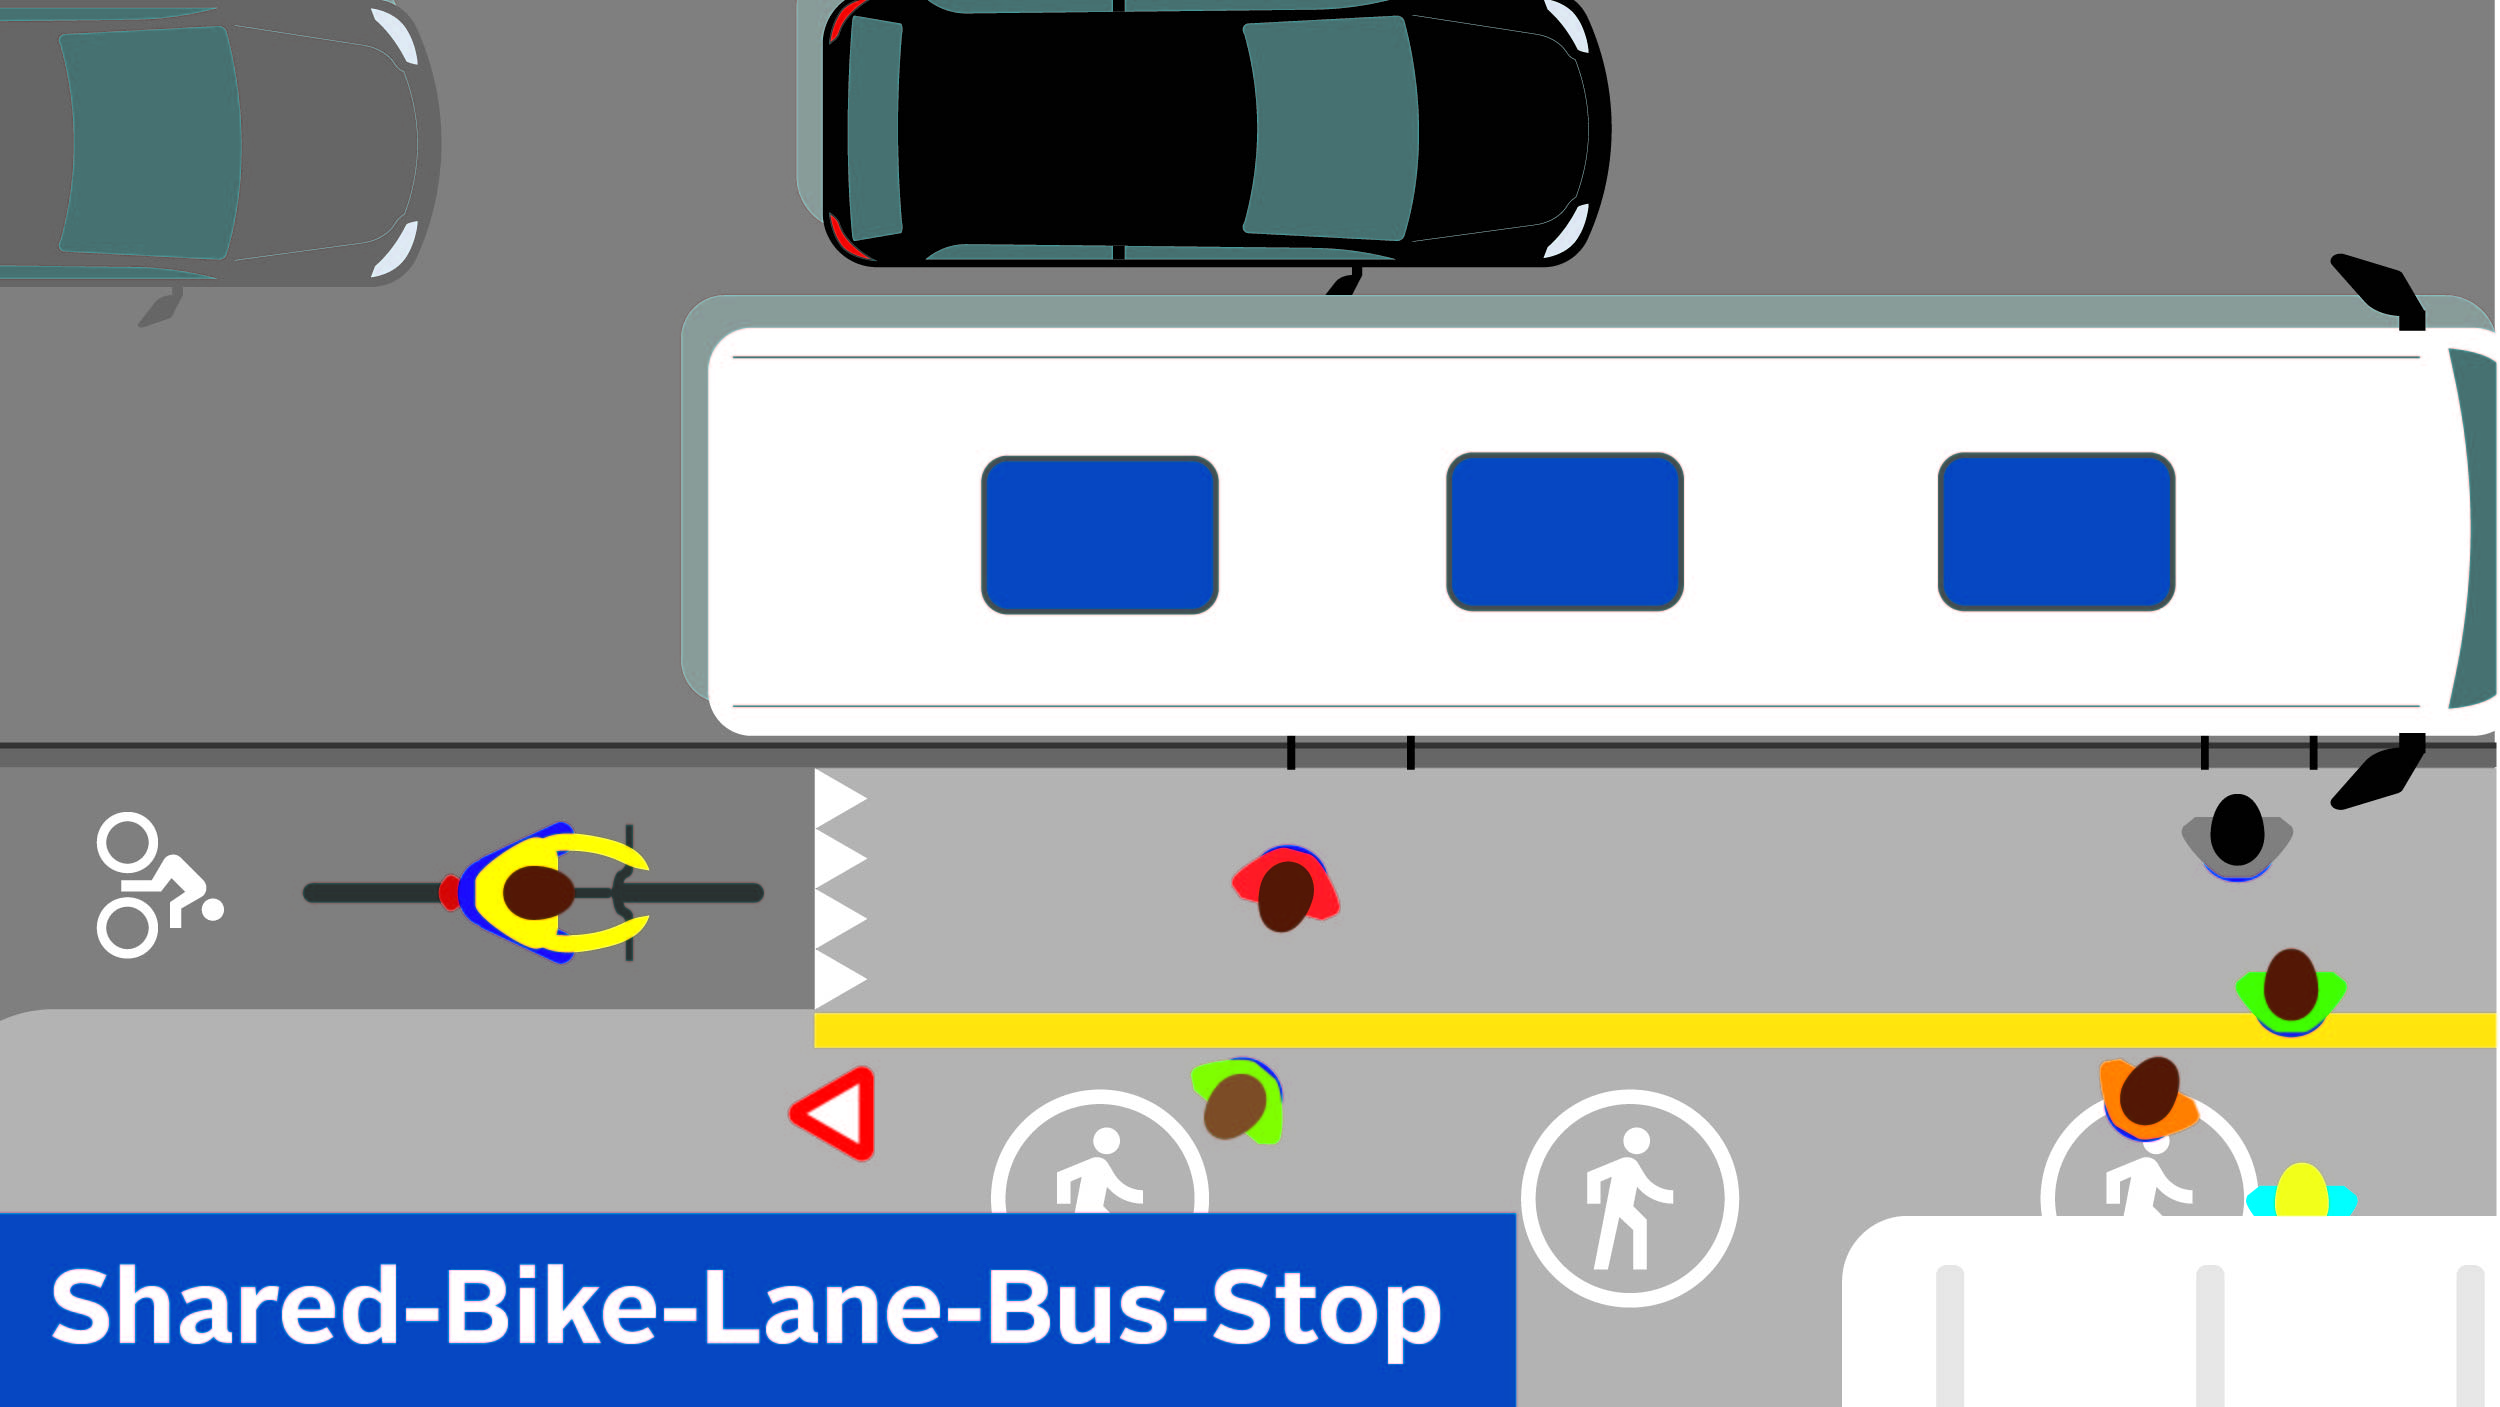 Diagram showing how people walking, cycling, and taking transit should use the shared bike-lane-bus-stop.